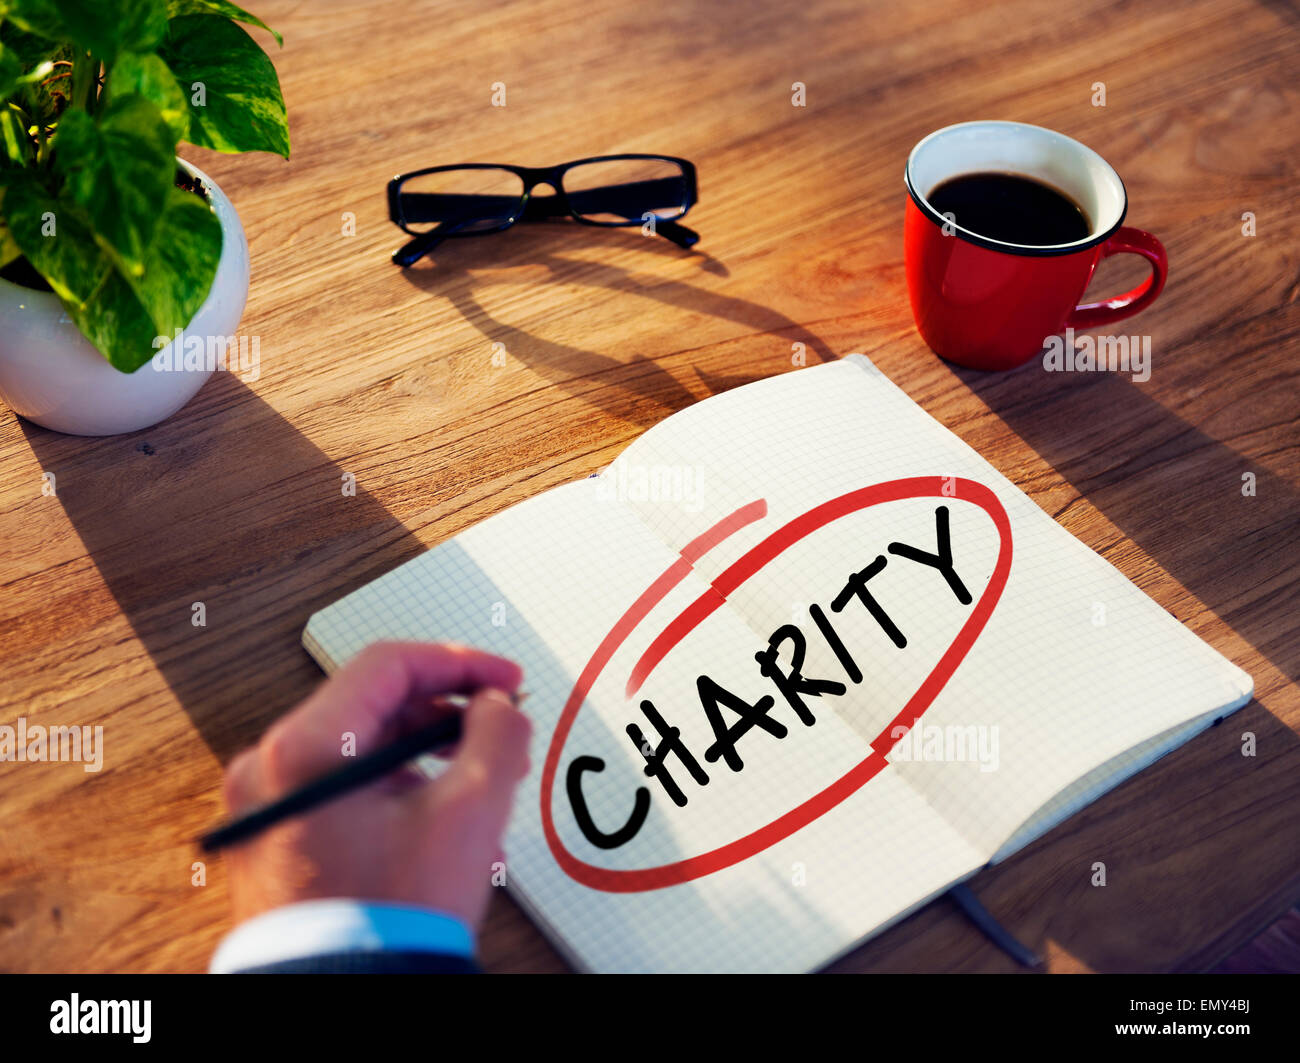 Man with Note Pad and Charity Concepts Stock Photo